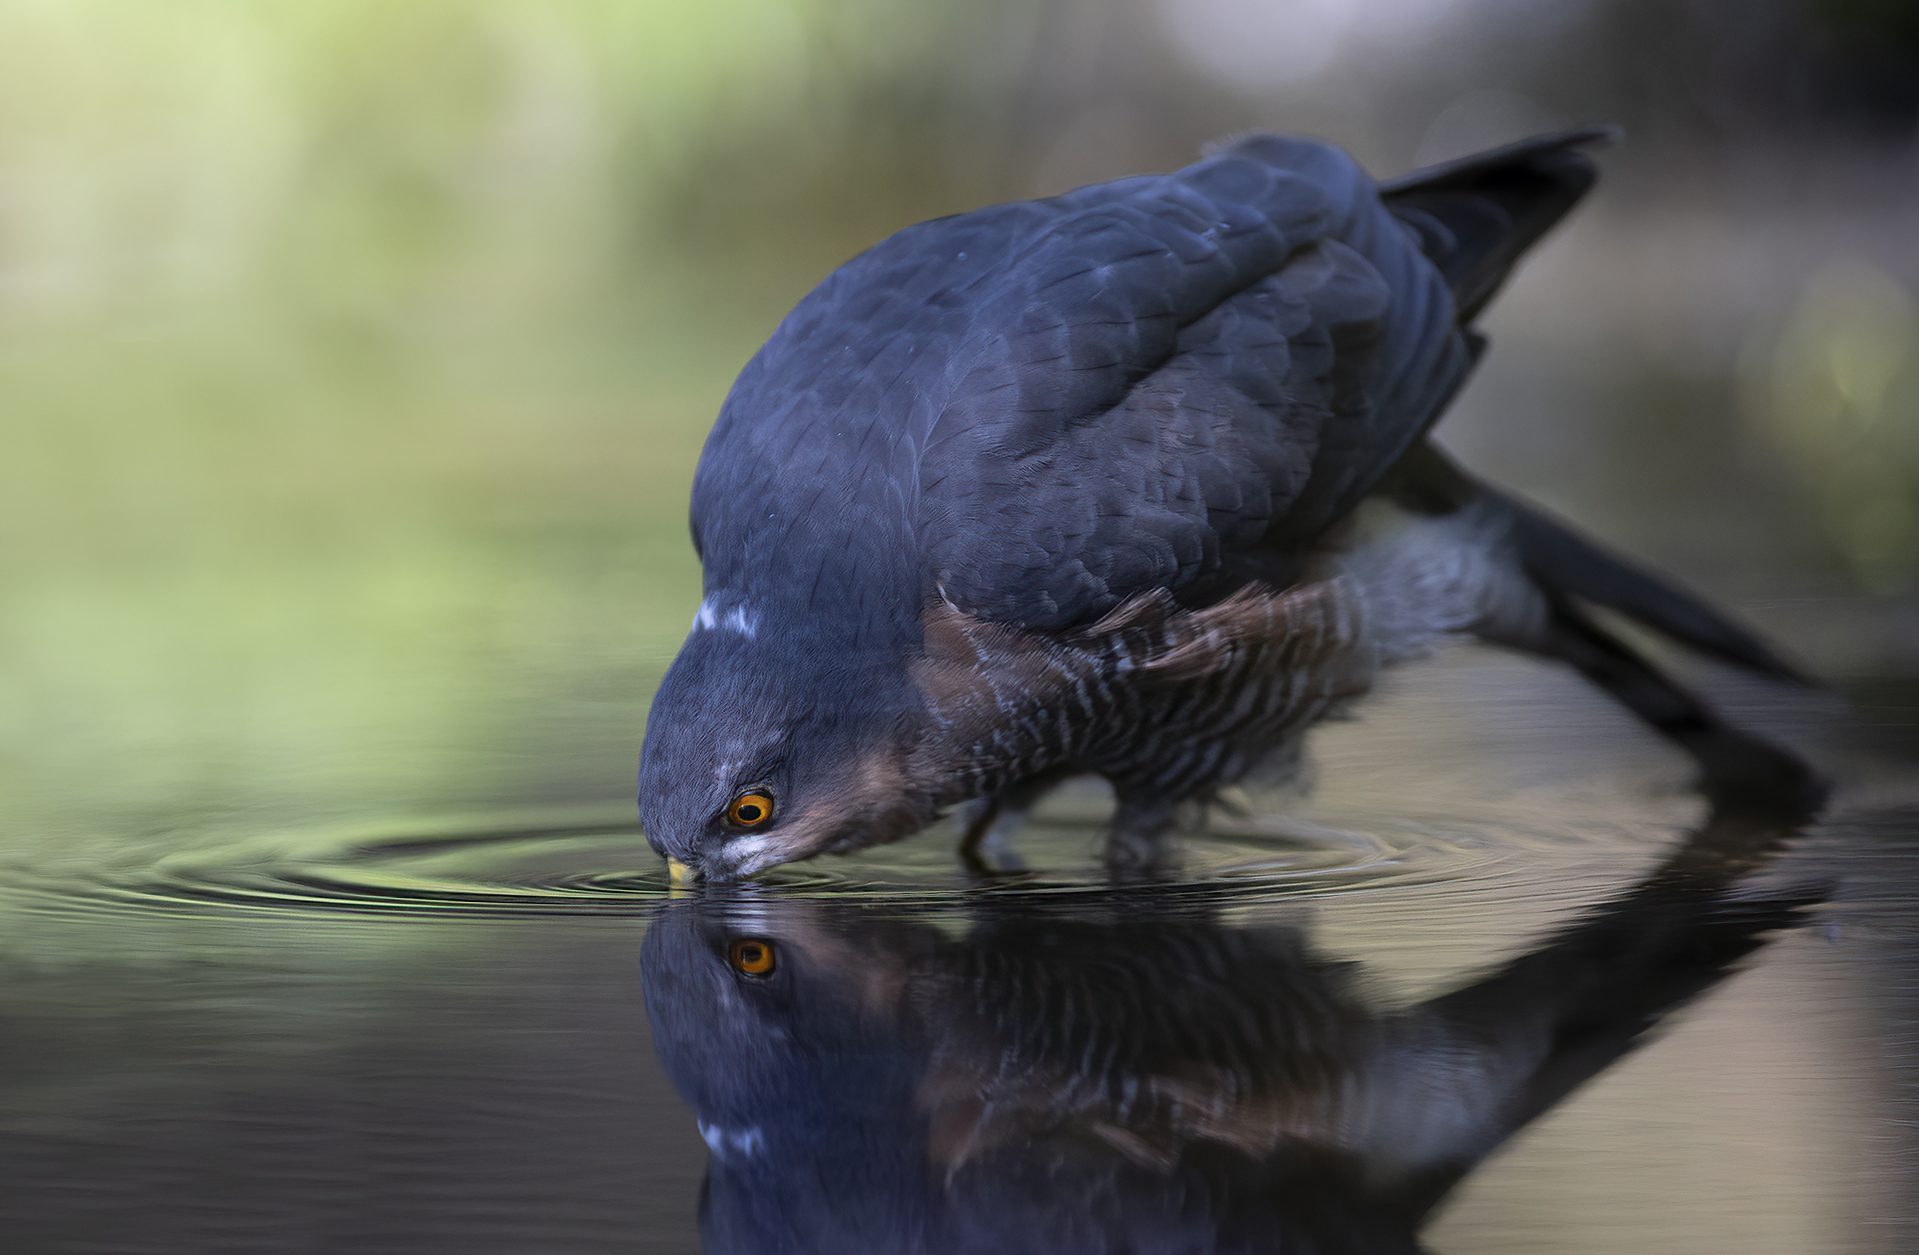 the reflection of the sparrowhawk...